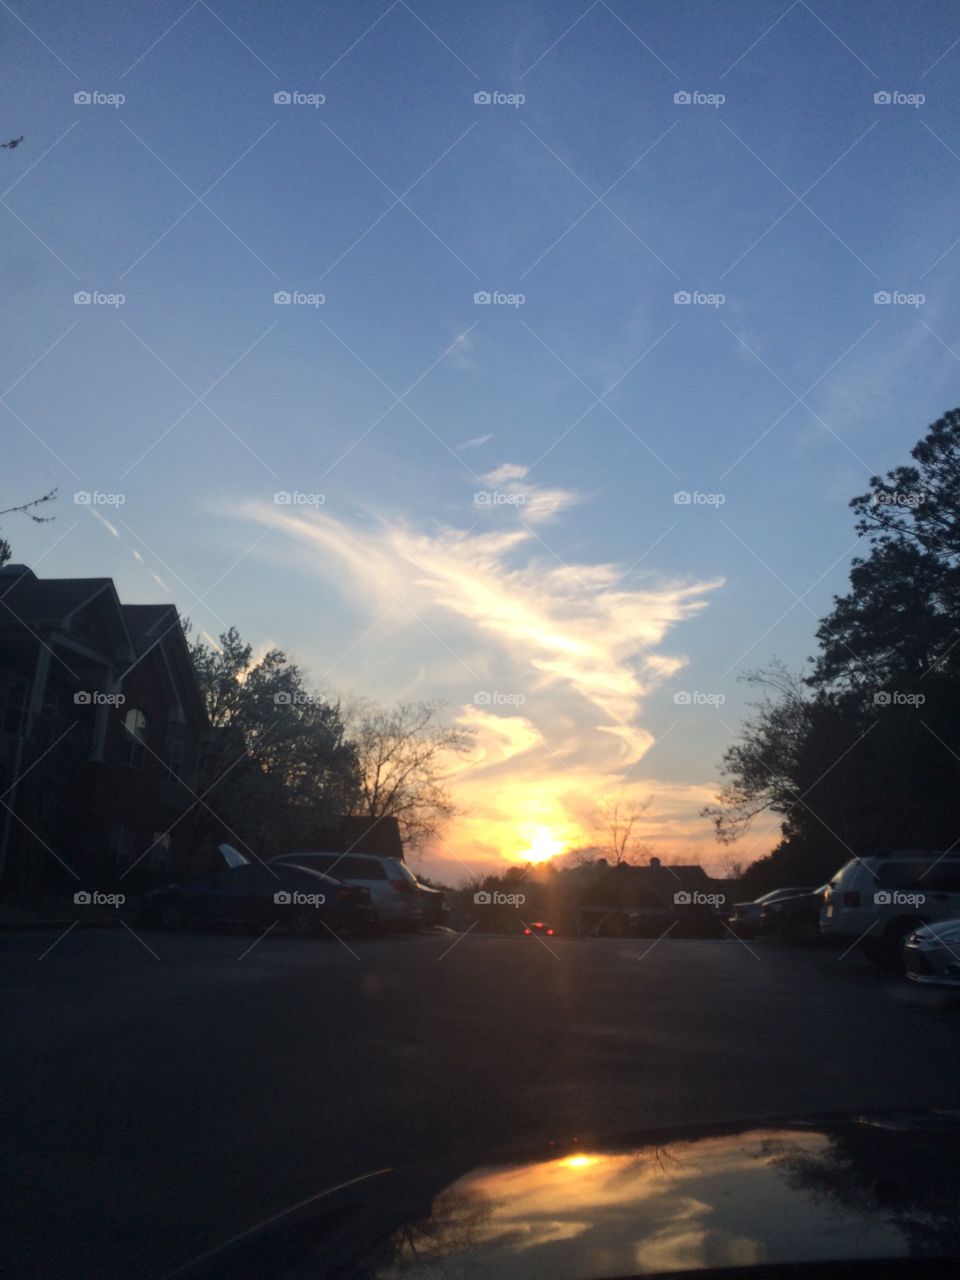 Sunset in Hoover